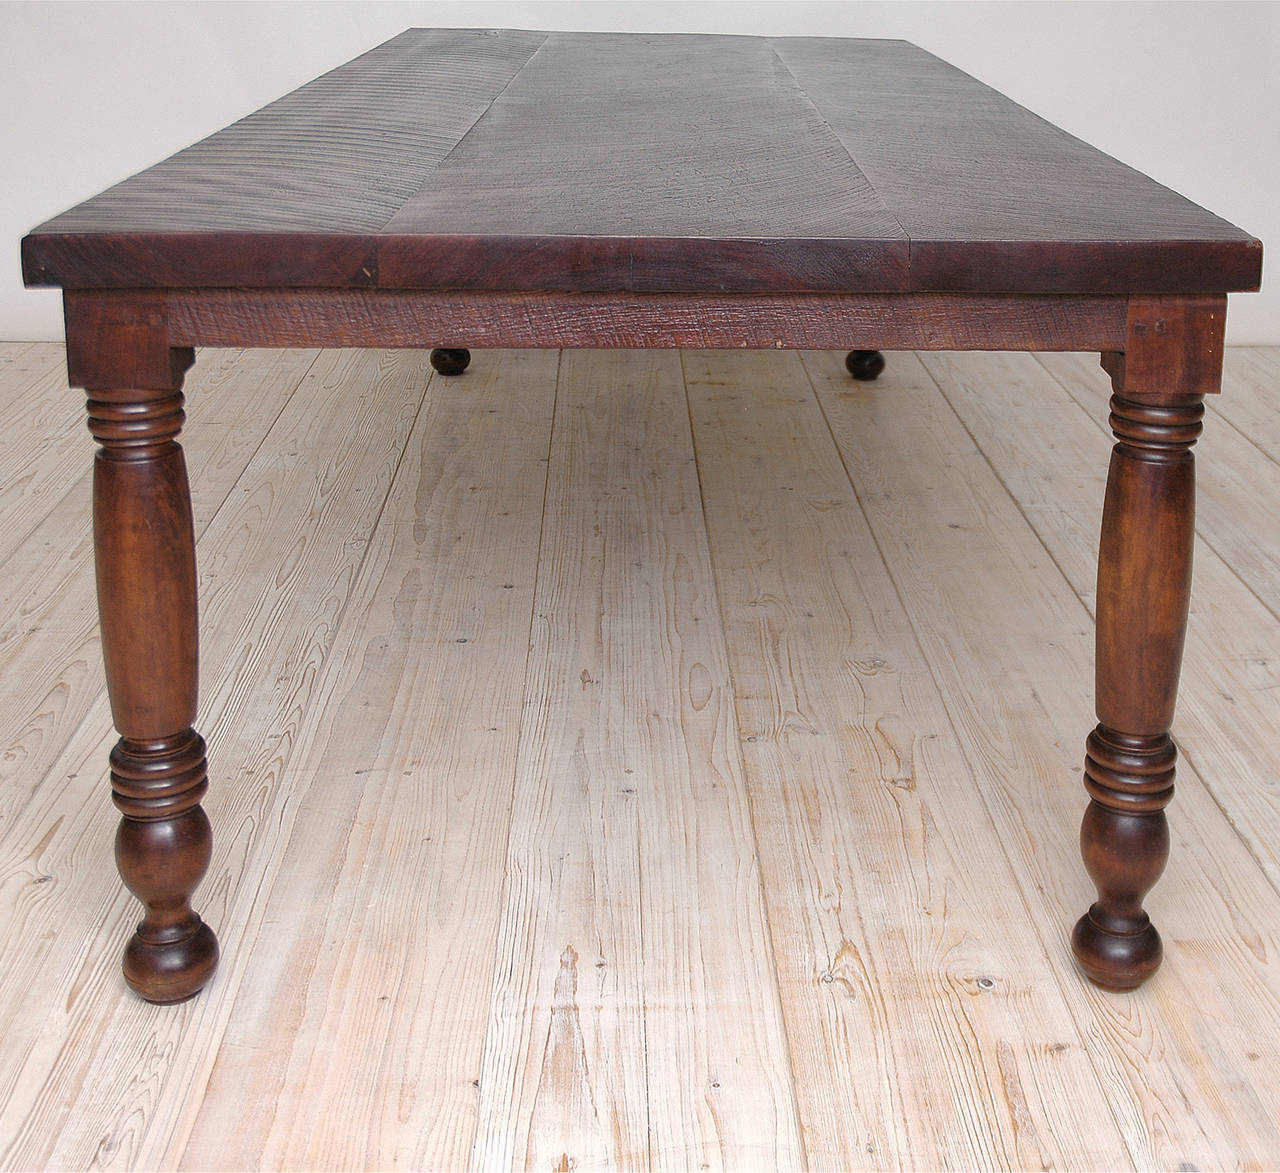 
We are just completing this exact table in American cherry. It is 10' long x 41 1/2